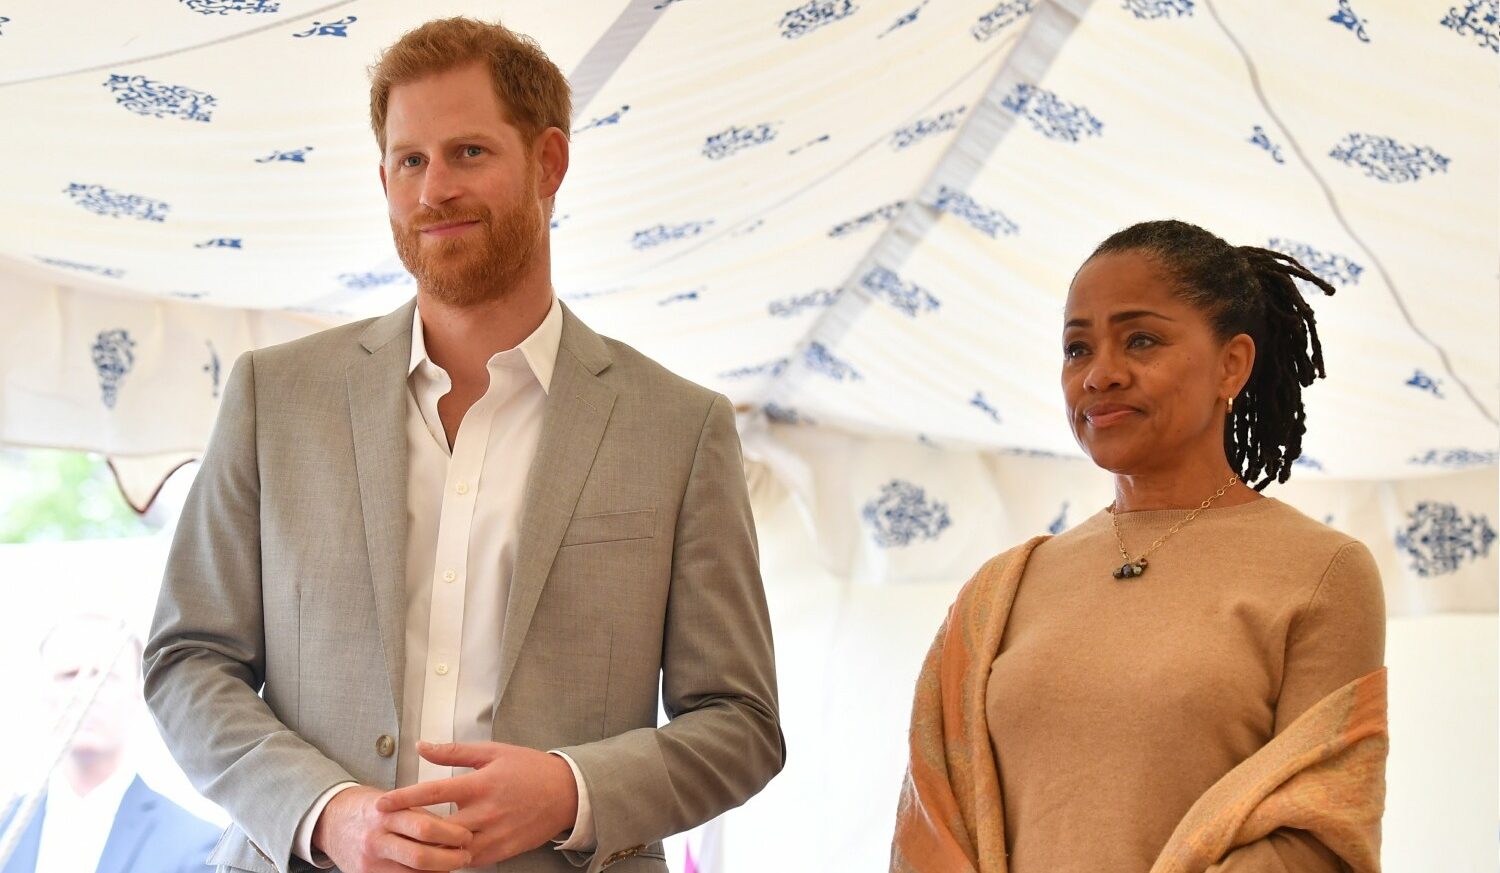 Harry & Meghan: Doria Ragland had an adorable reaction after meeting Prince for the first time

+2023